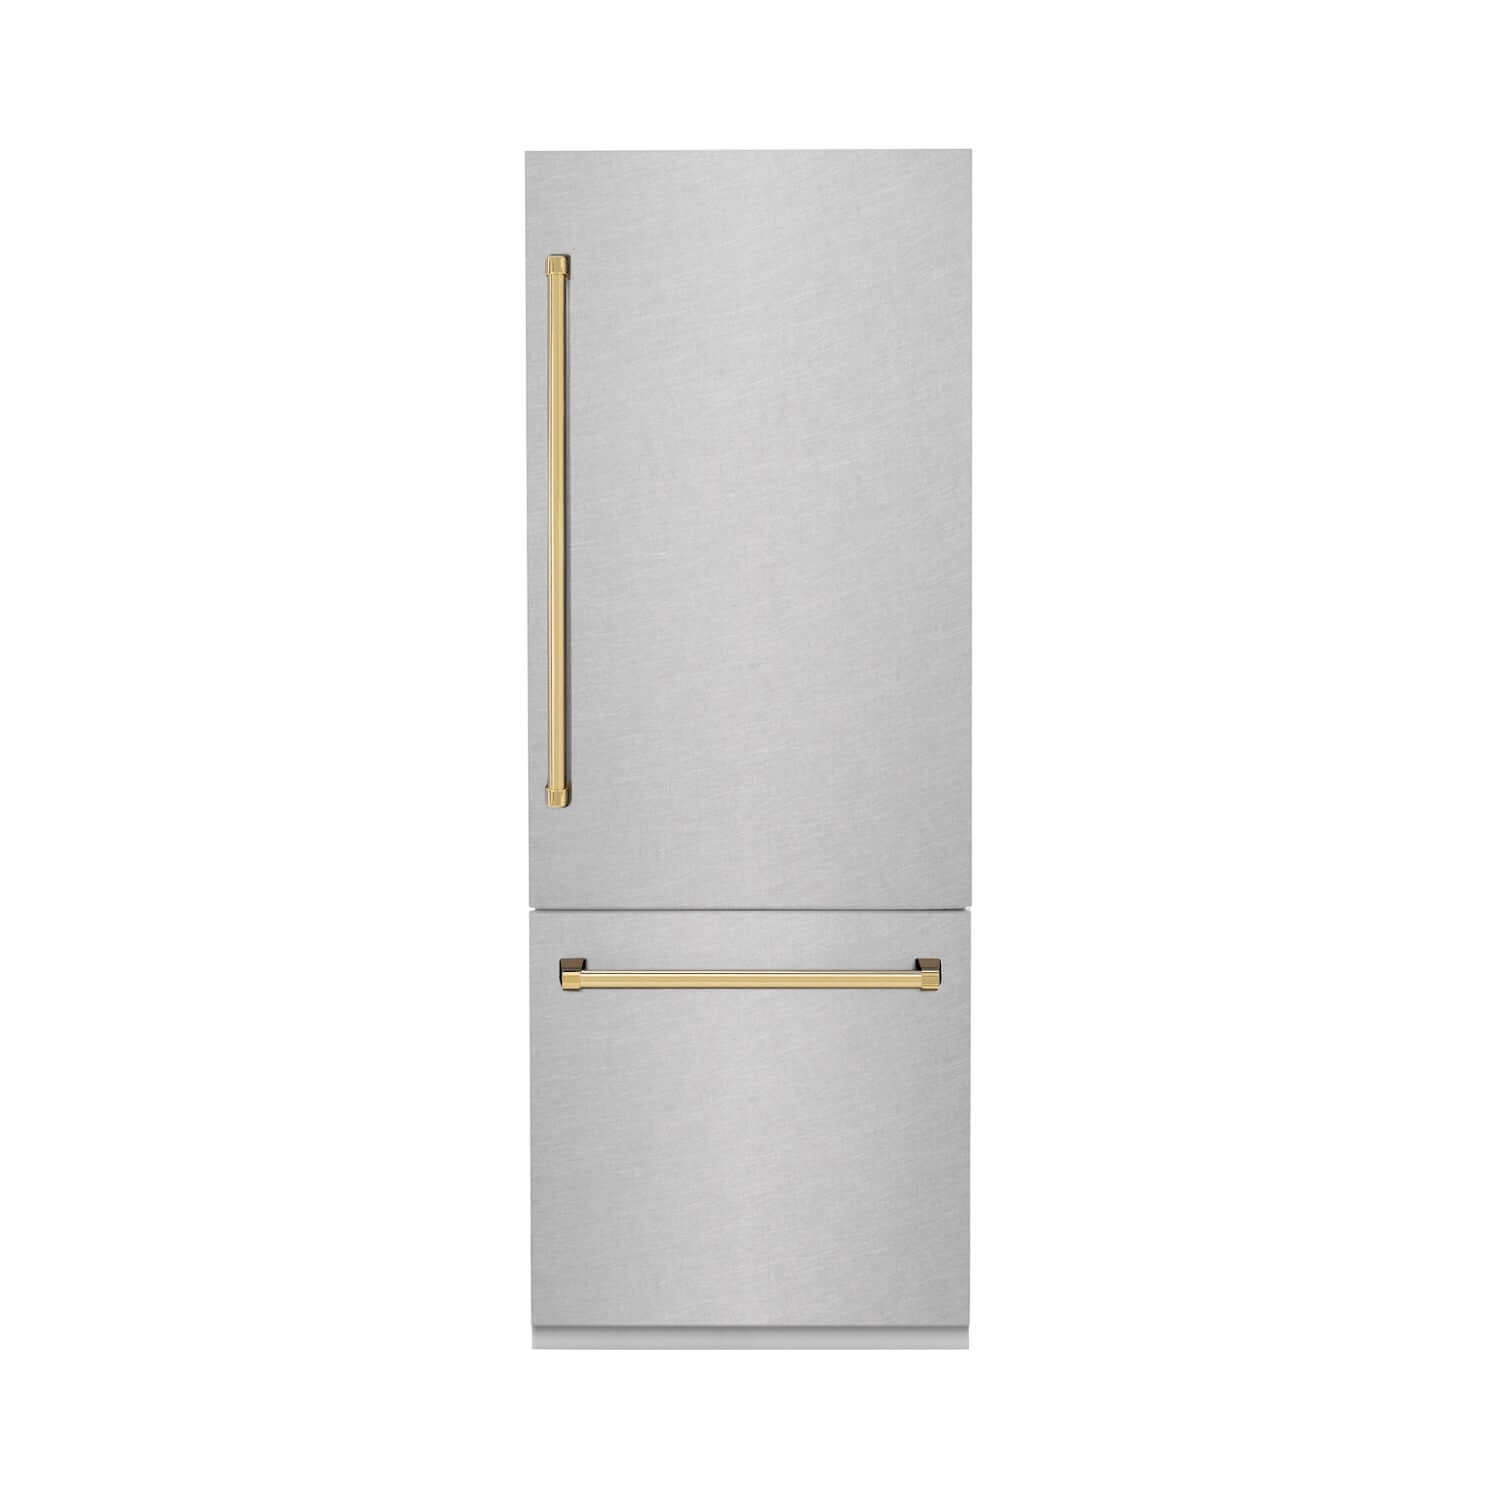 ZLINE Autograph Edition 30 in. 16.1 cu. ft. Built-in 2-Door Bottom Freezer Refrigerator with Internal Water and Ice Dispenser in Fingerprint Resistant Stainless Steel with Polished Gold Accents (RBIVZ-SN-30-G) 